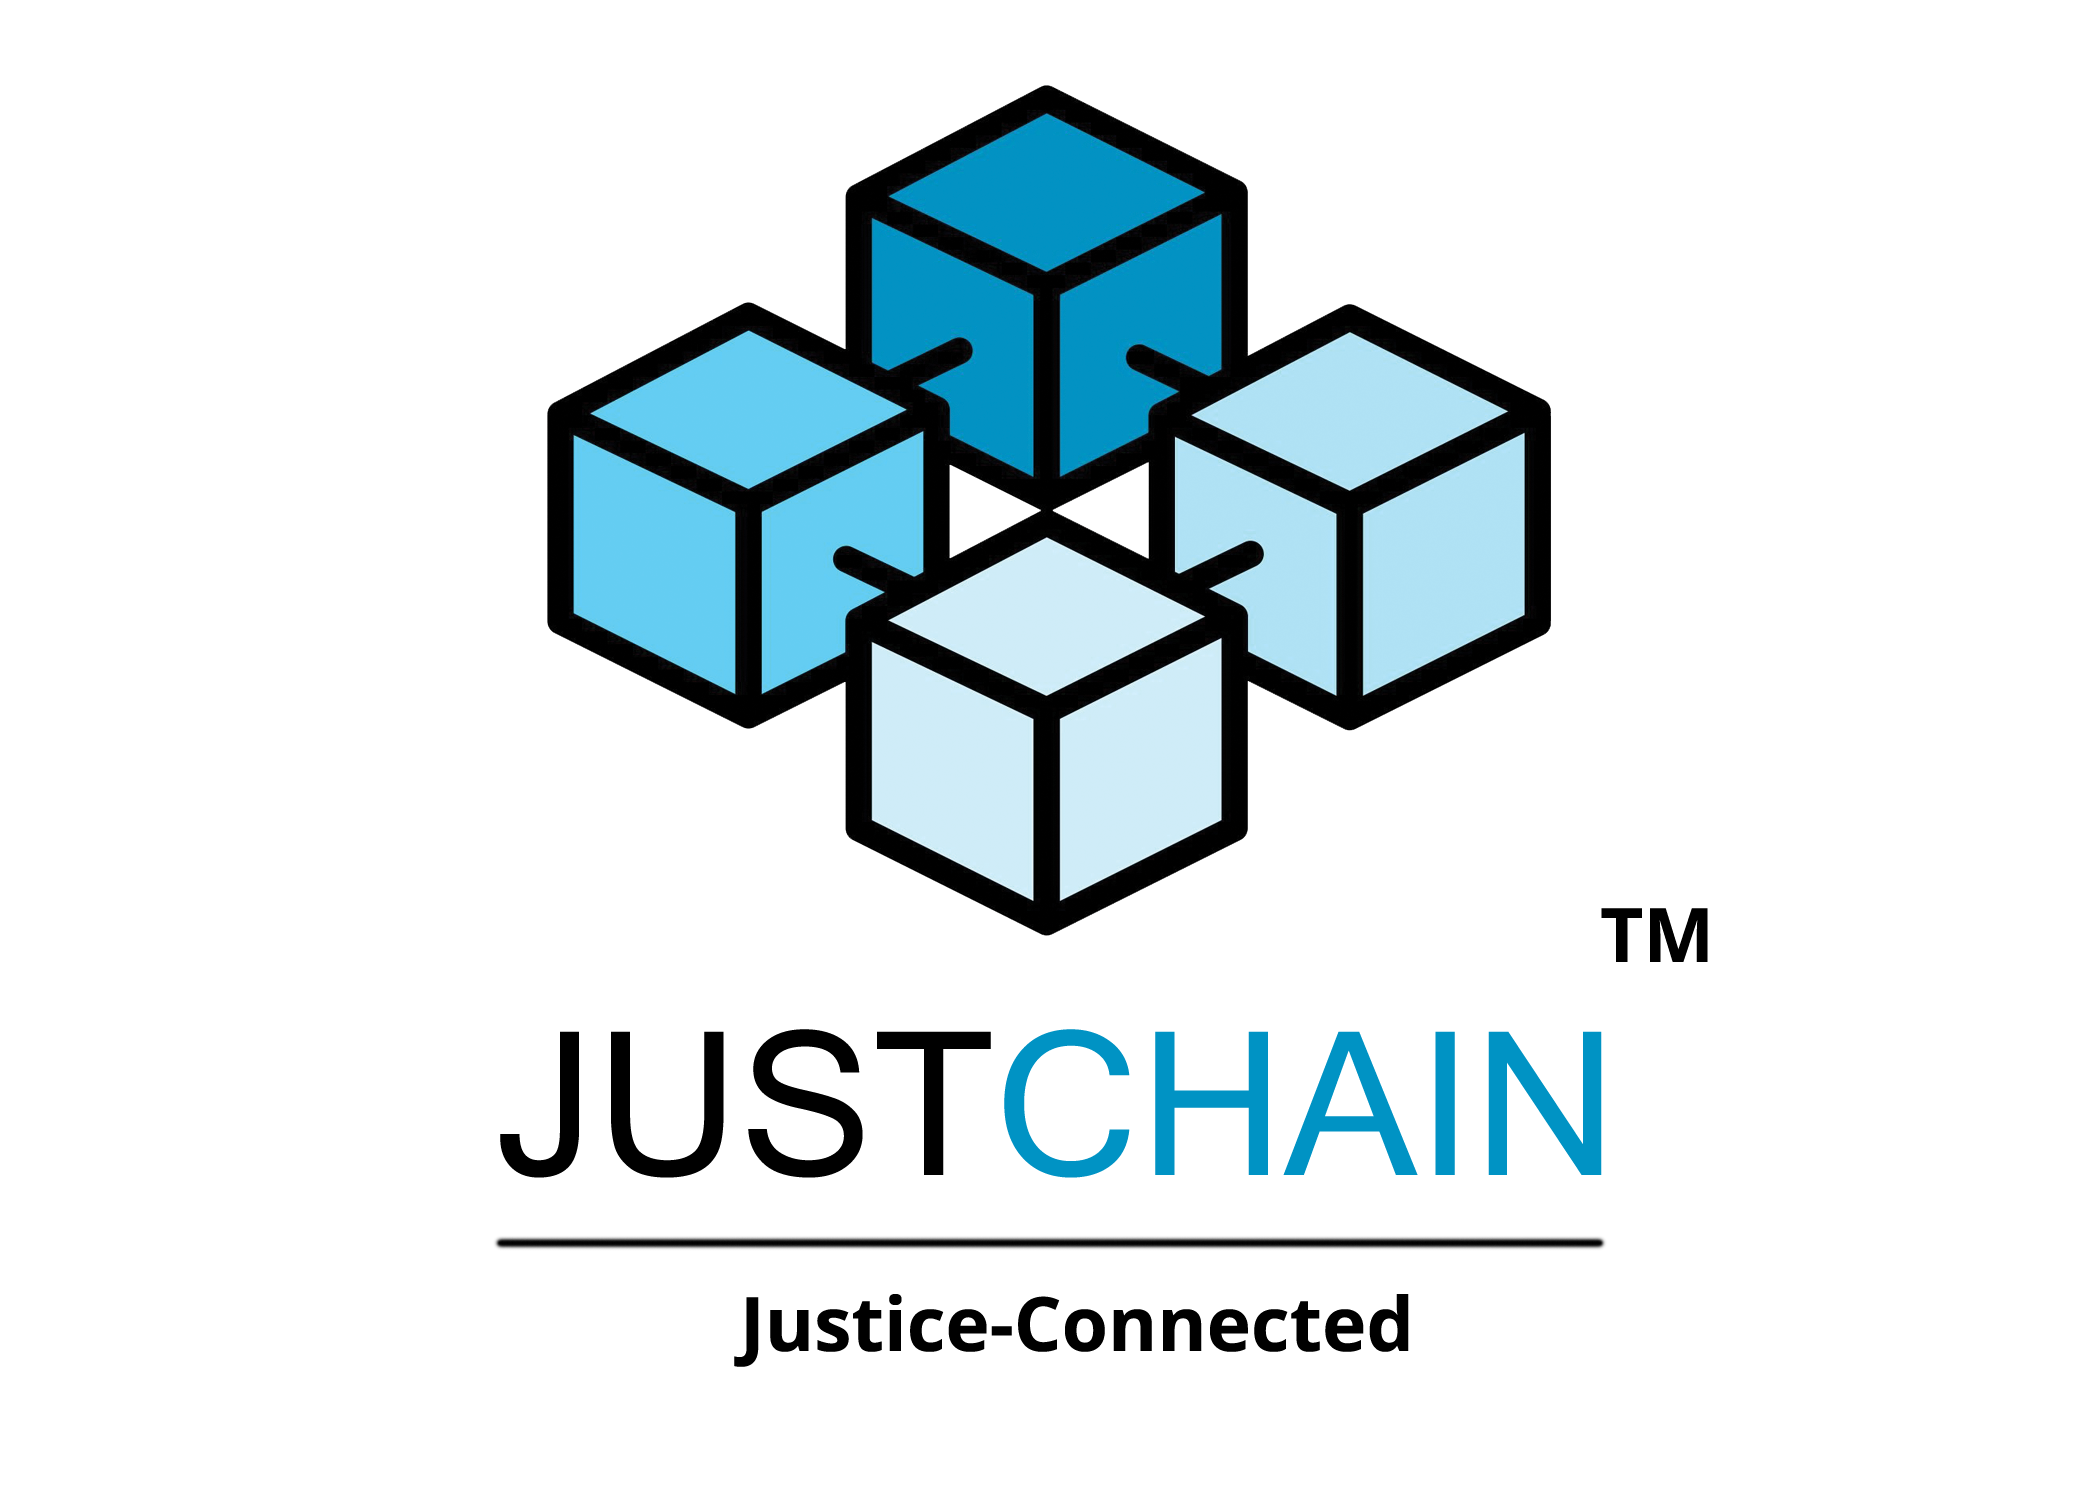 JUSTCHAIN